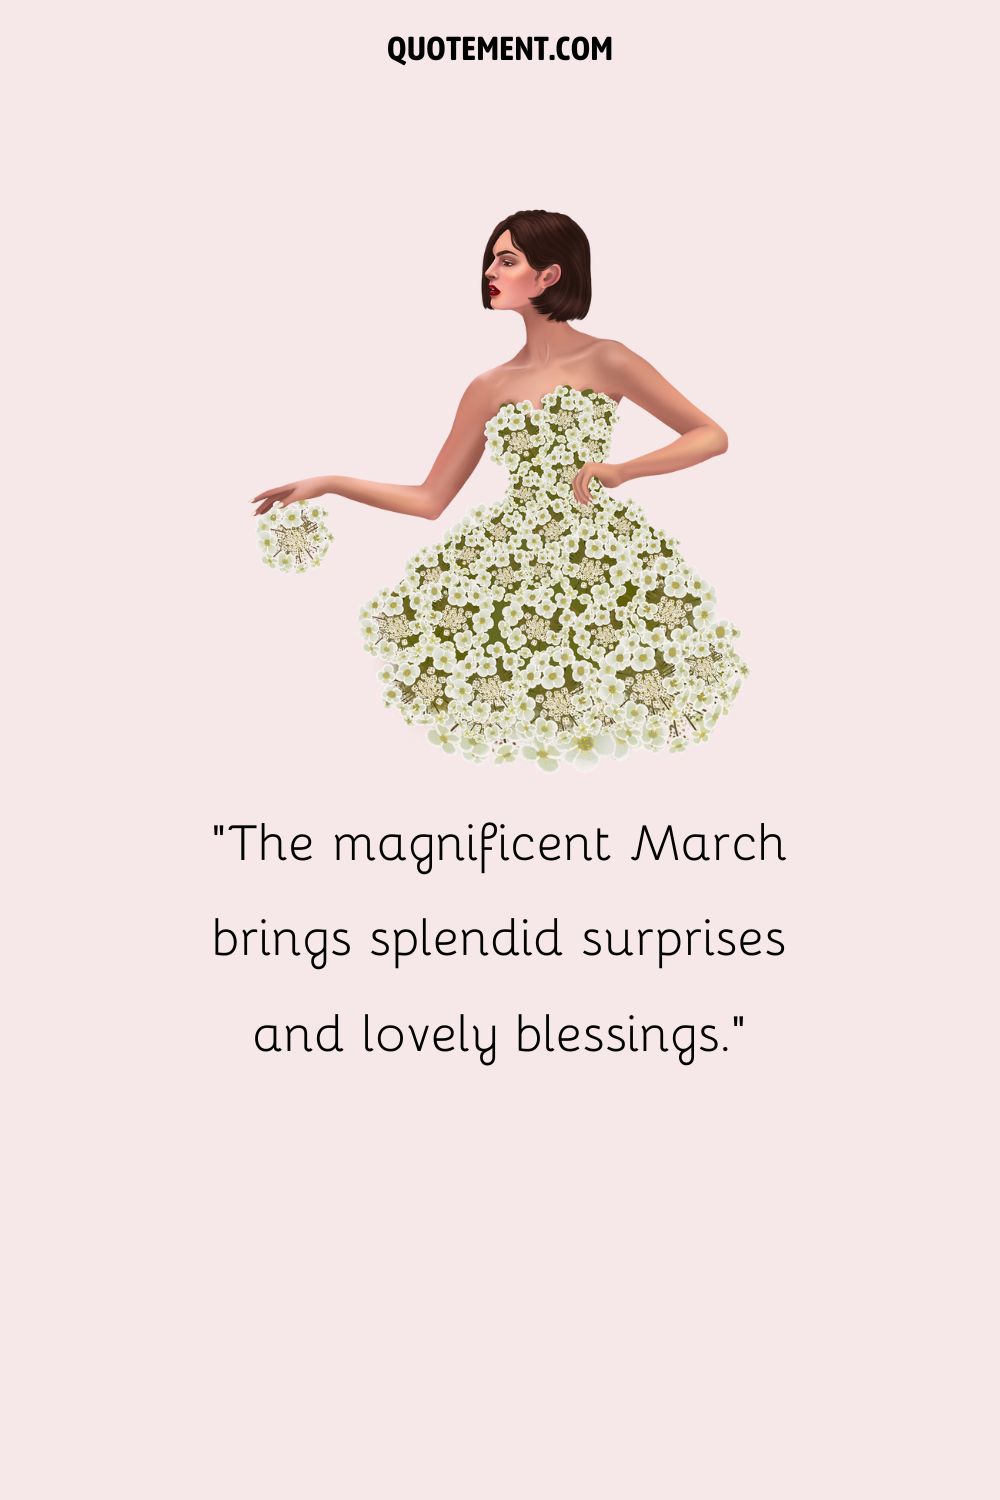 "The magnificent March brings splendid surprises and lovely blessings." 